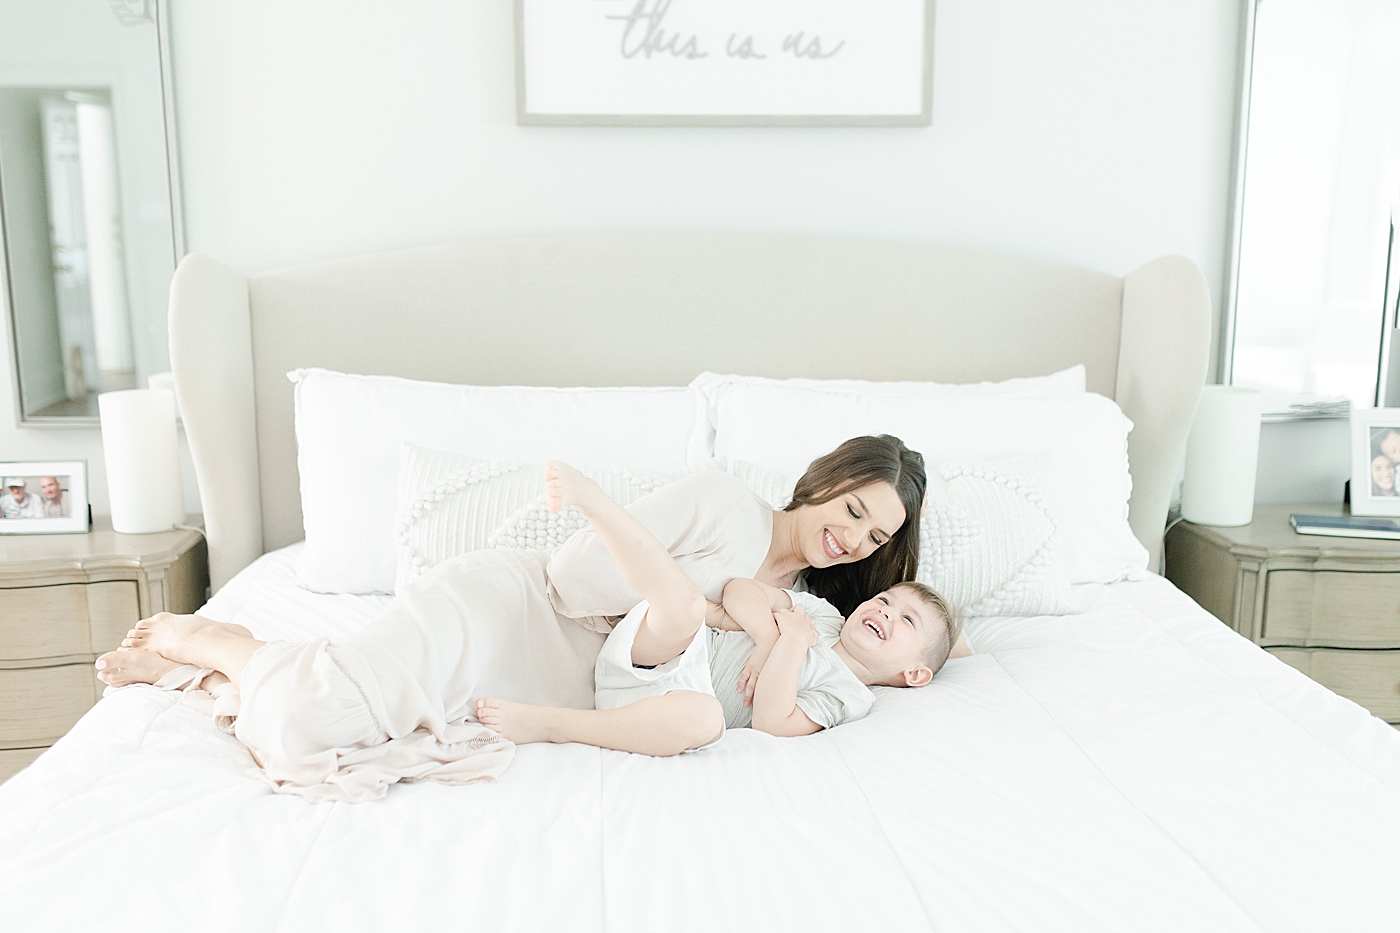 Mom tickling son on bed during family photoshoot. Photo by Little Sunshine Photography